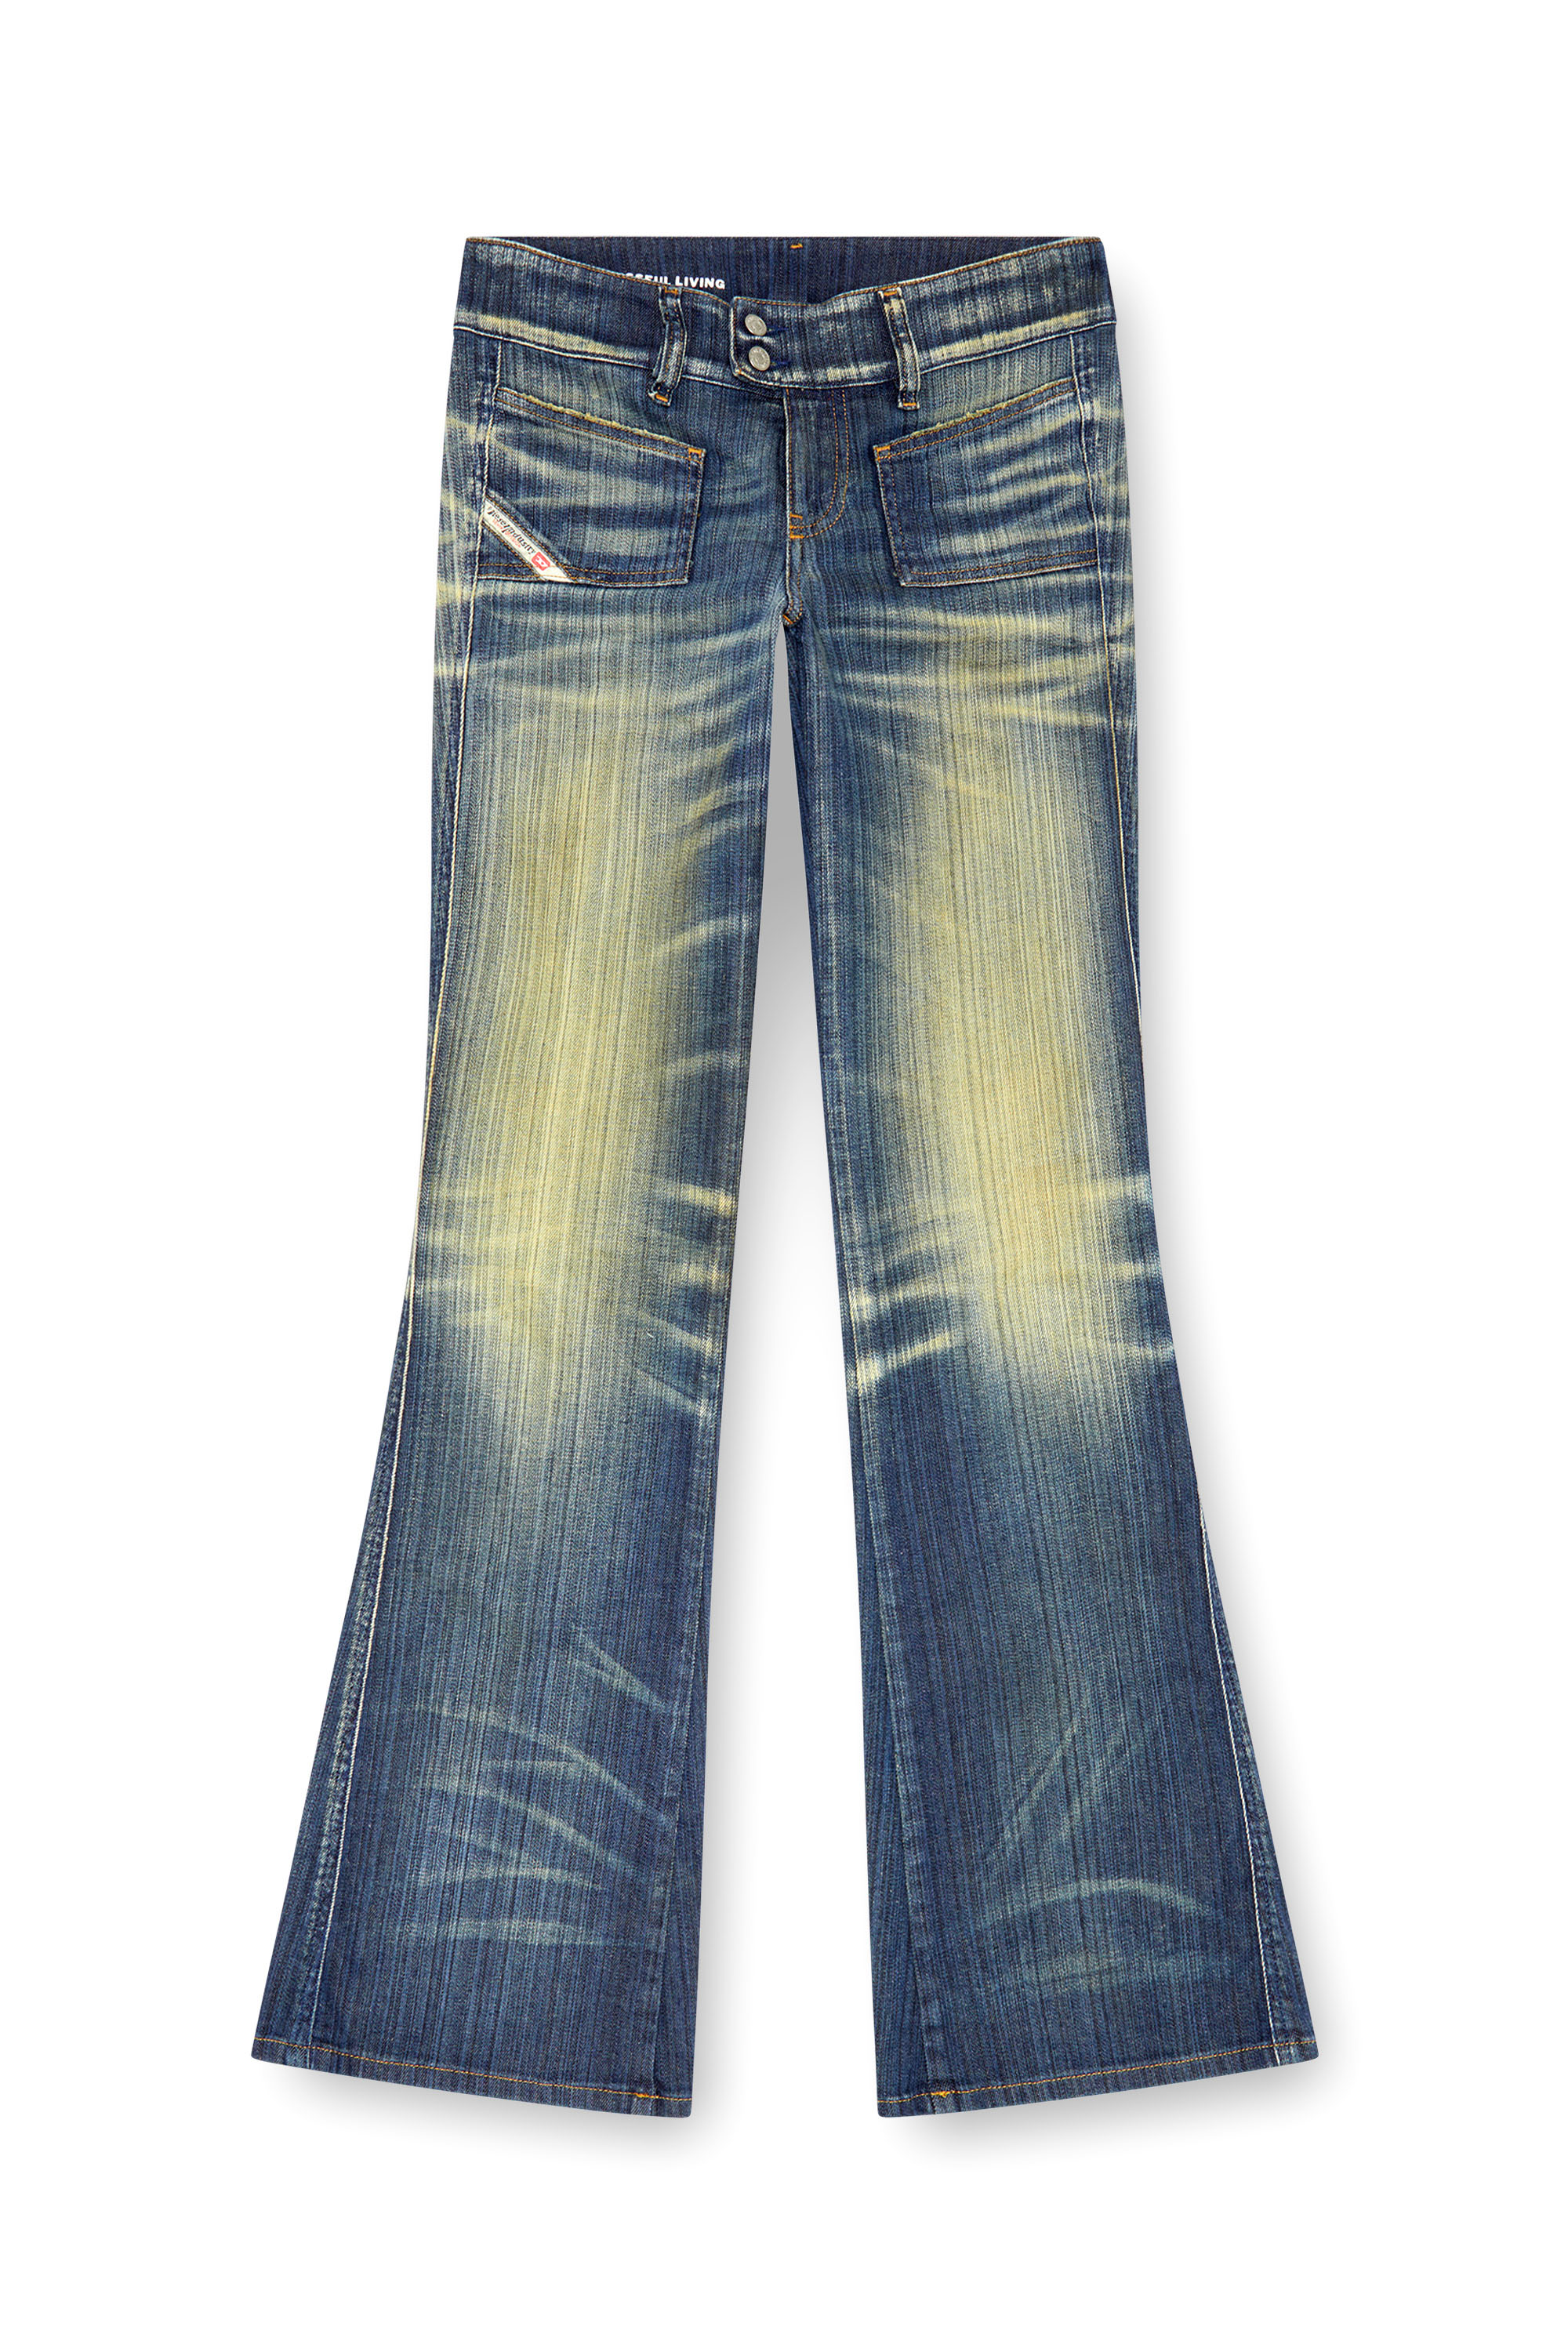 Diesel - Bootcut and Flare Jeans D-Hush 09J46, Mujer Bootcut y Flare Jeans - D-Hush in Azul marino - Image 5